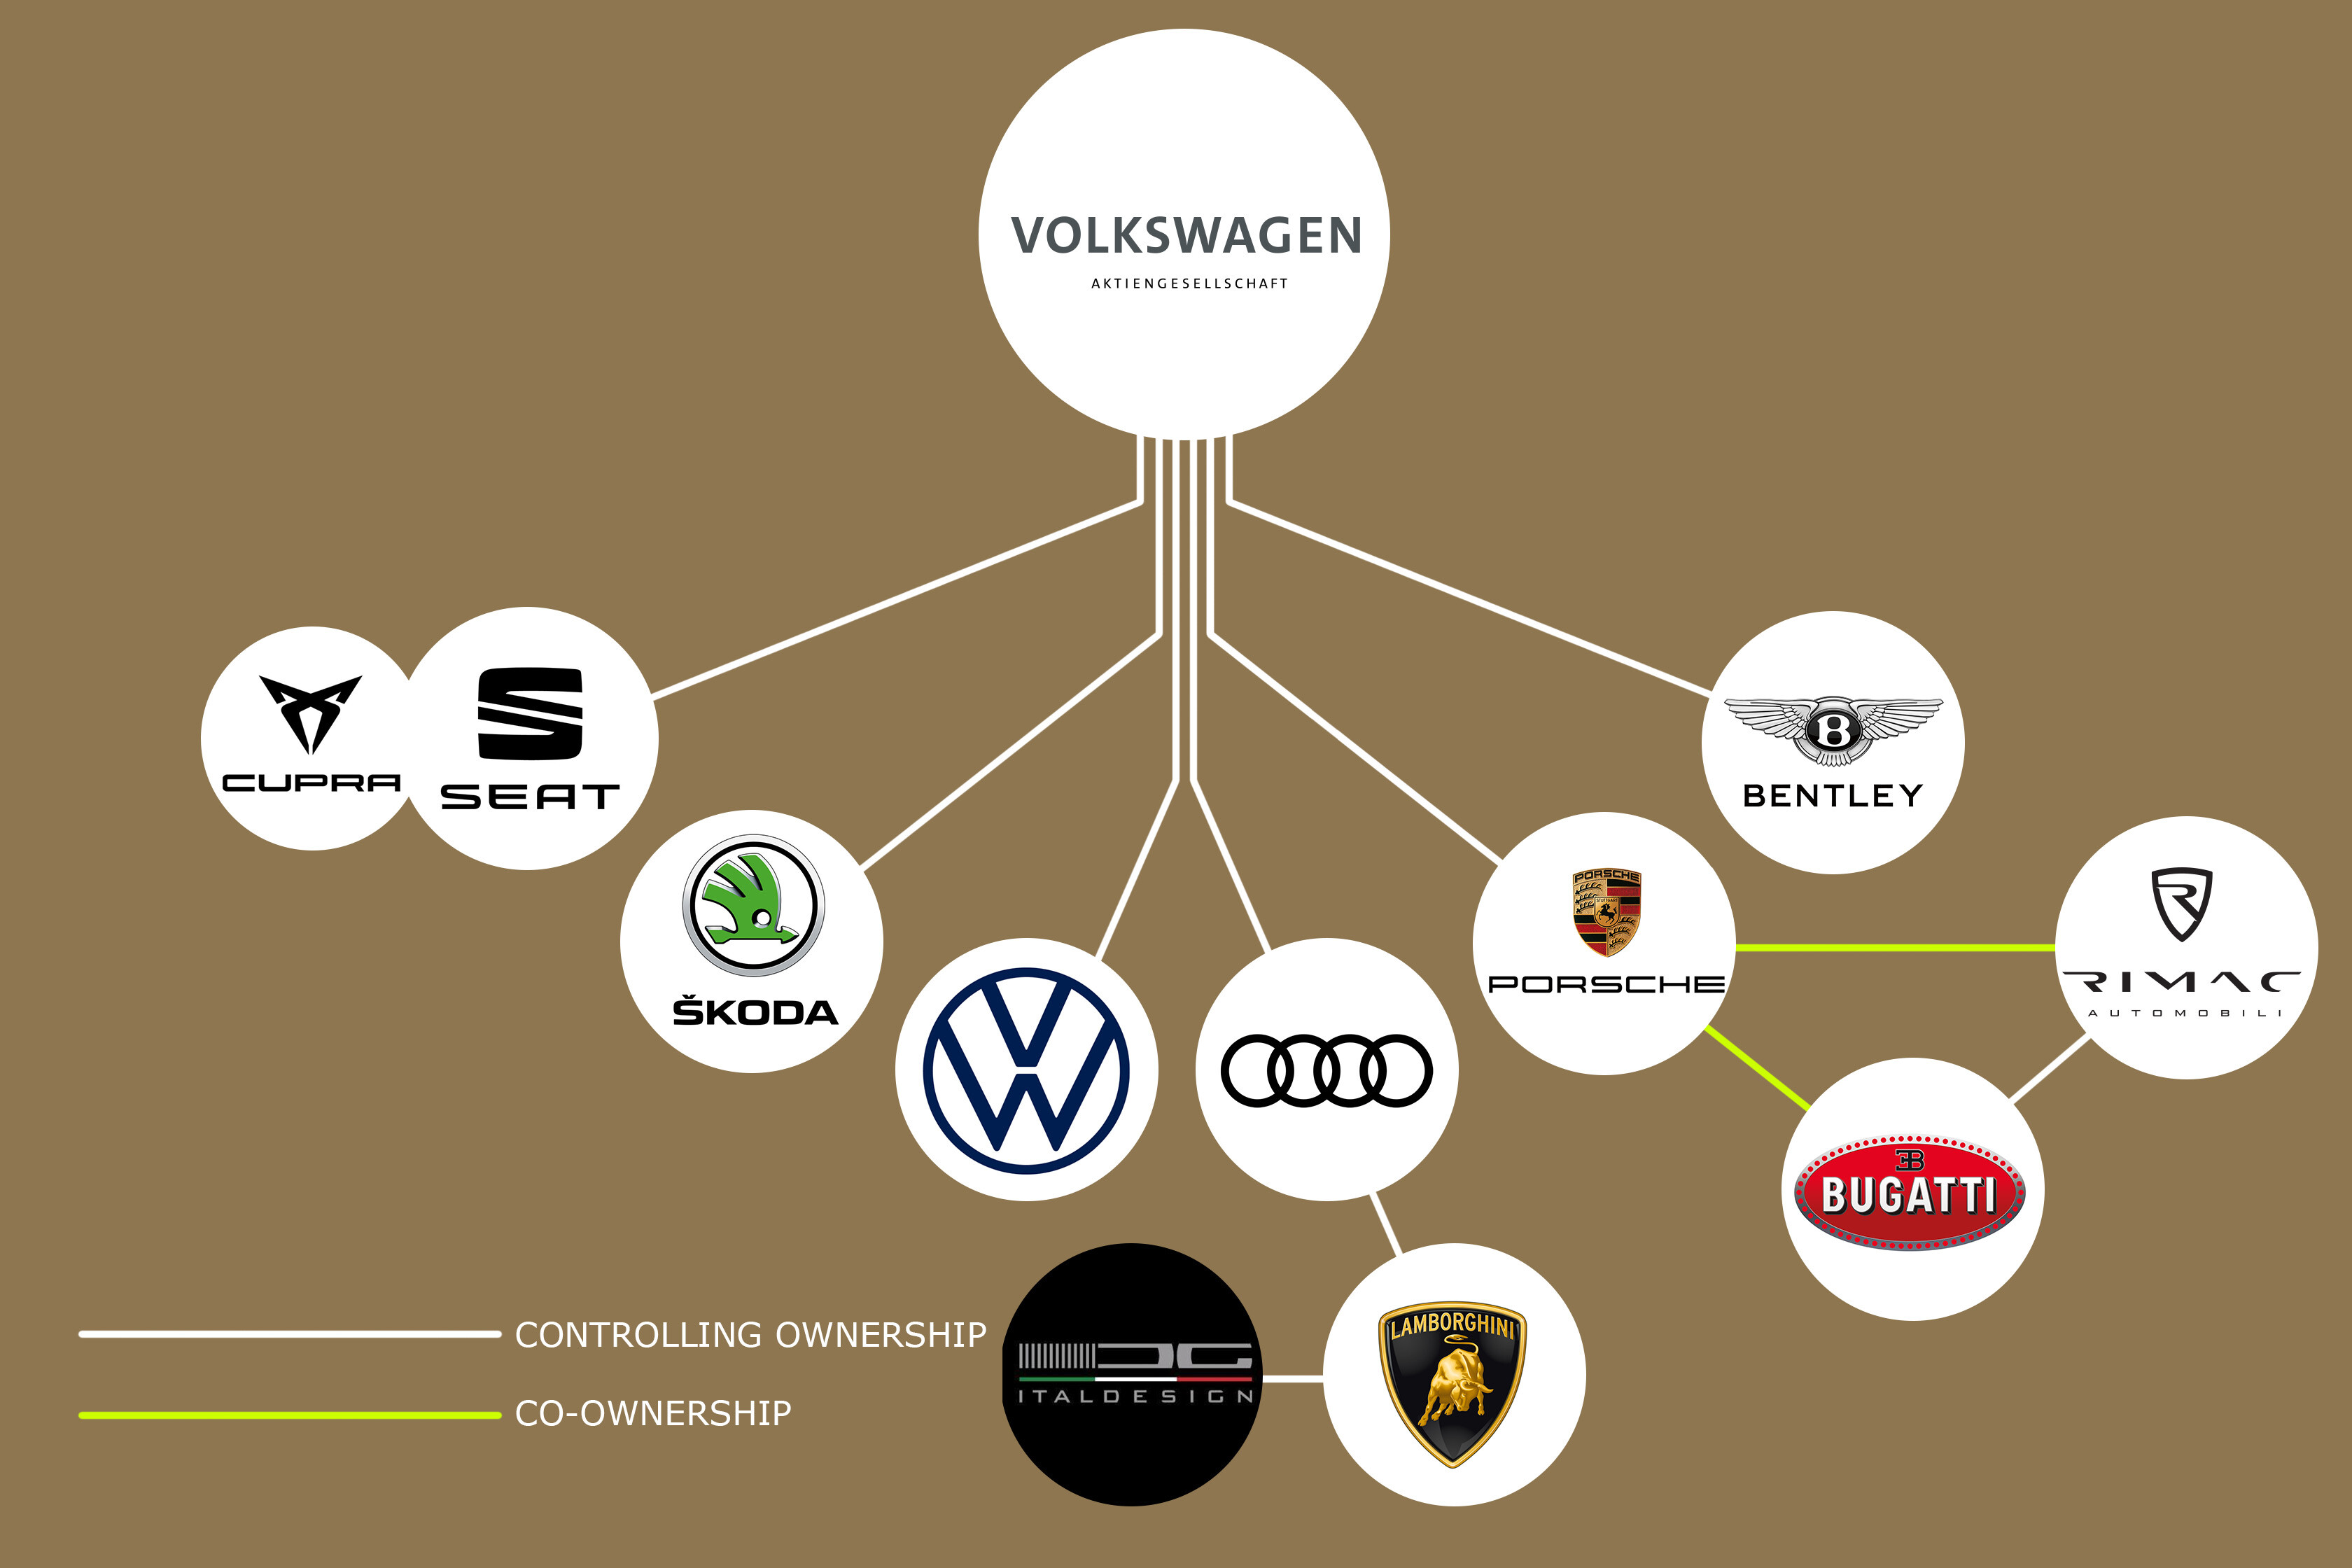 Who owns the most bugattis